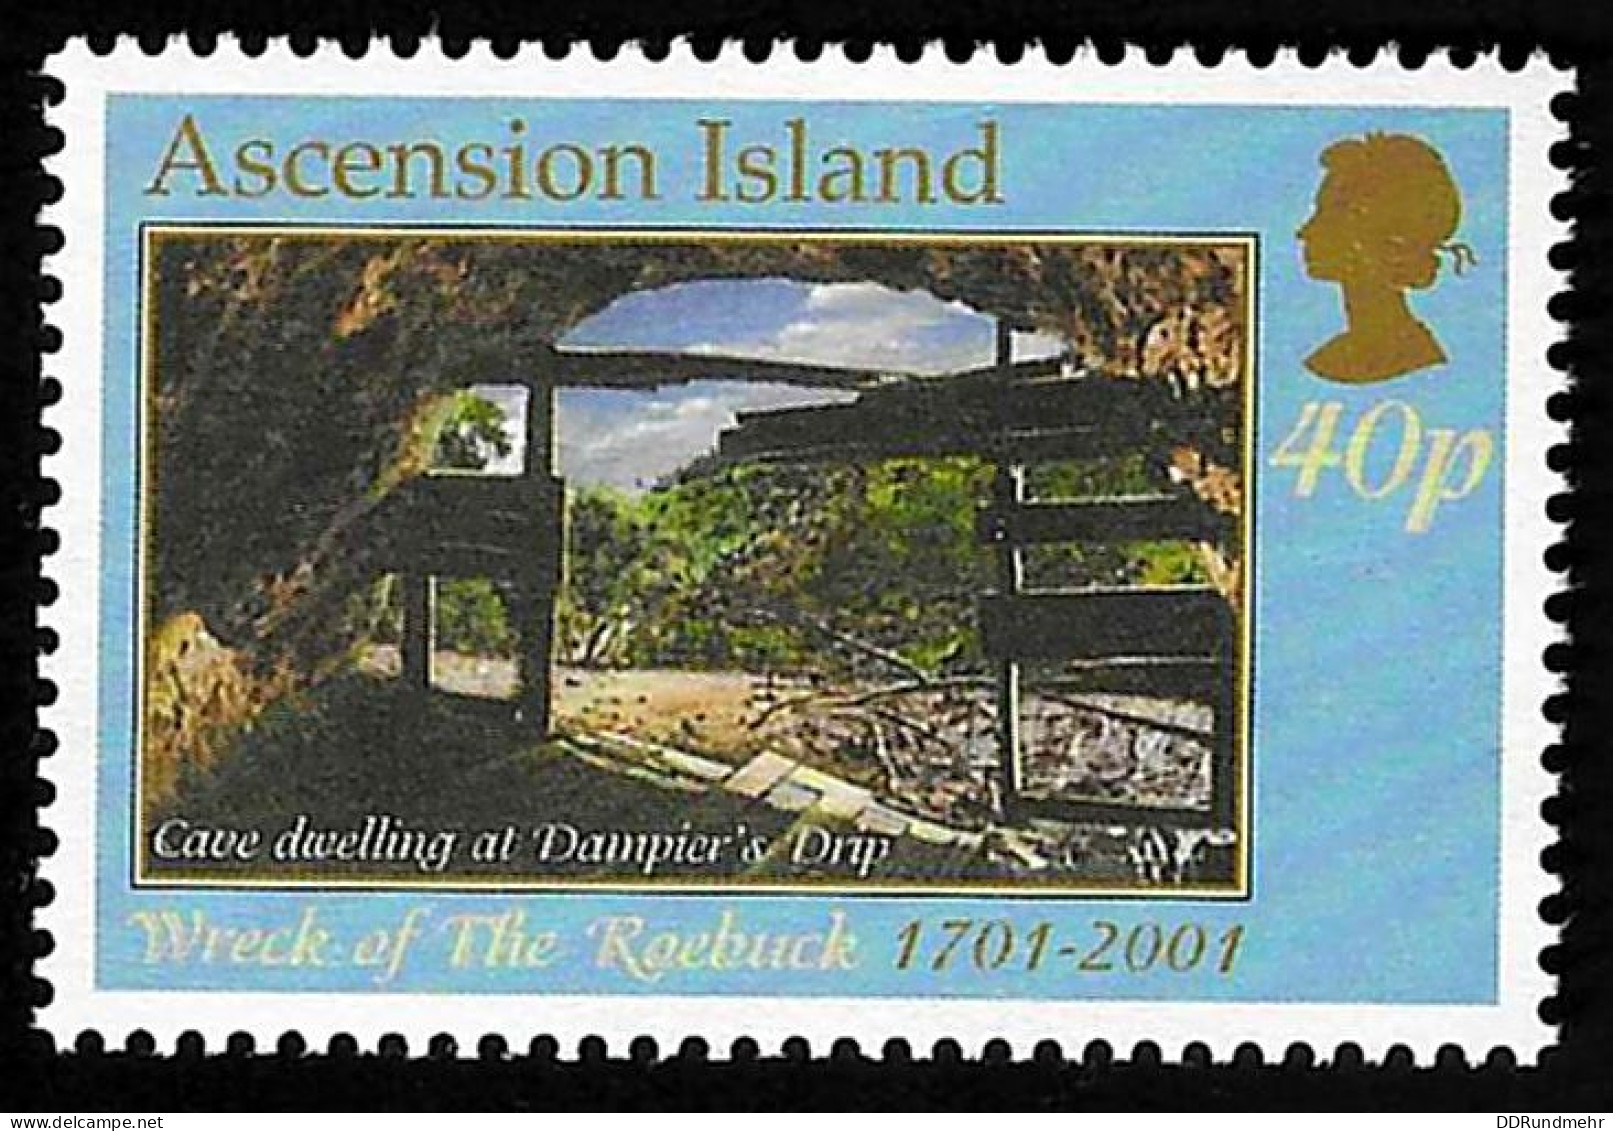 2001 Cave Dwelling Michel AC 840 Stamp Number AC 771 Yvert Et Tellier AC 781 Stanley Gibbons AC 817 Xx MNH - Ascension